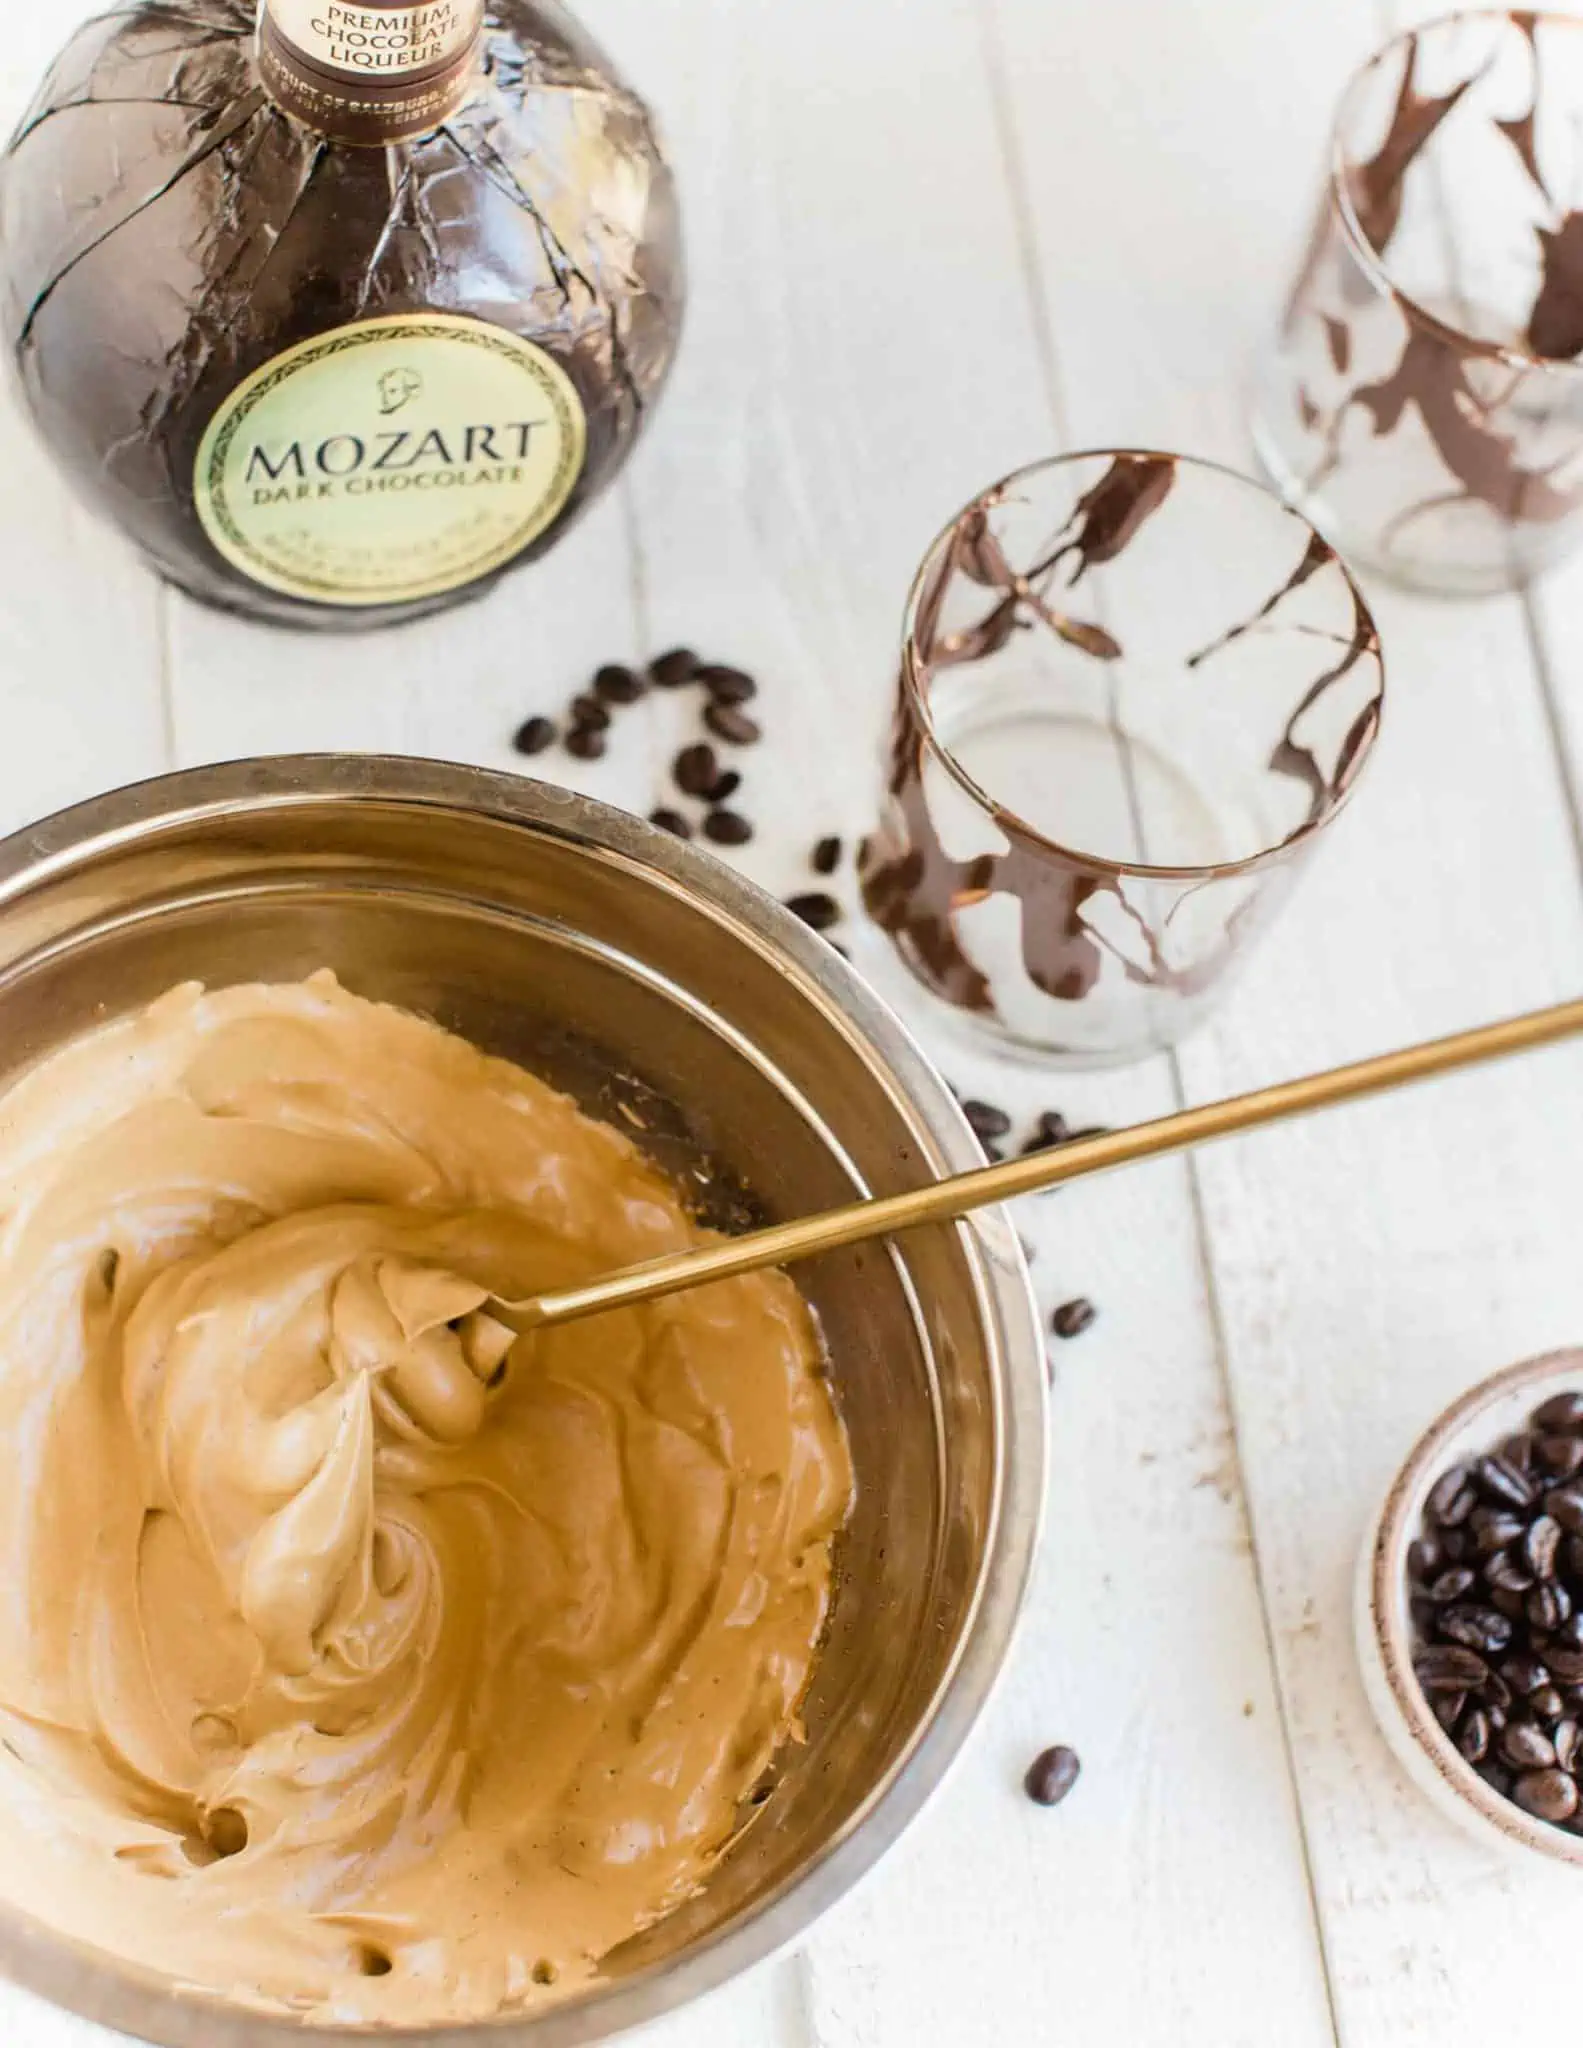 Dalgona Whipped Coffee Ingredients Flatlay o Table With Vegan Chocolate Liqueur